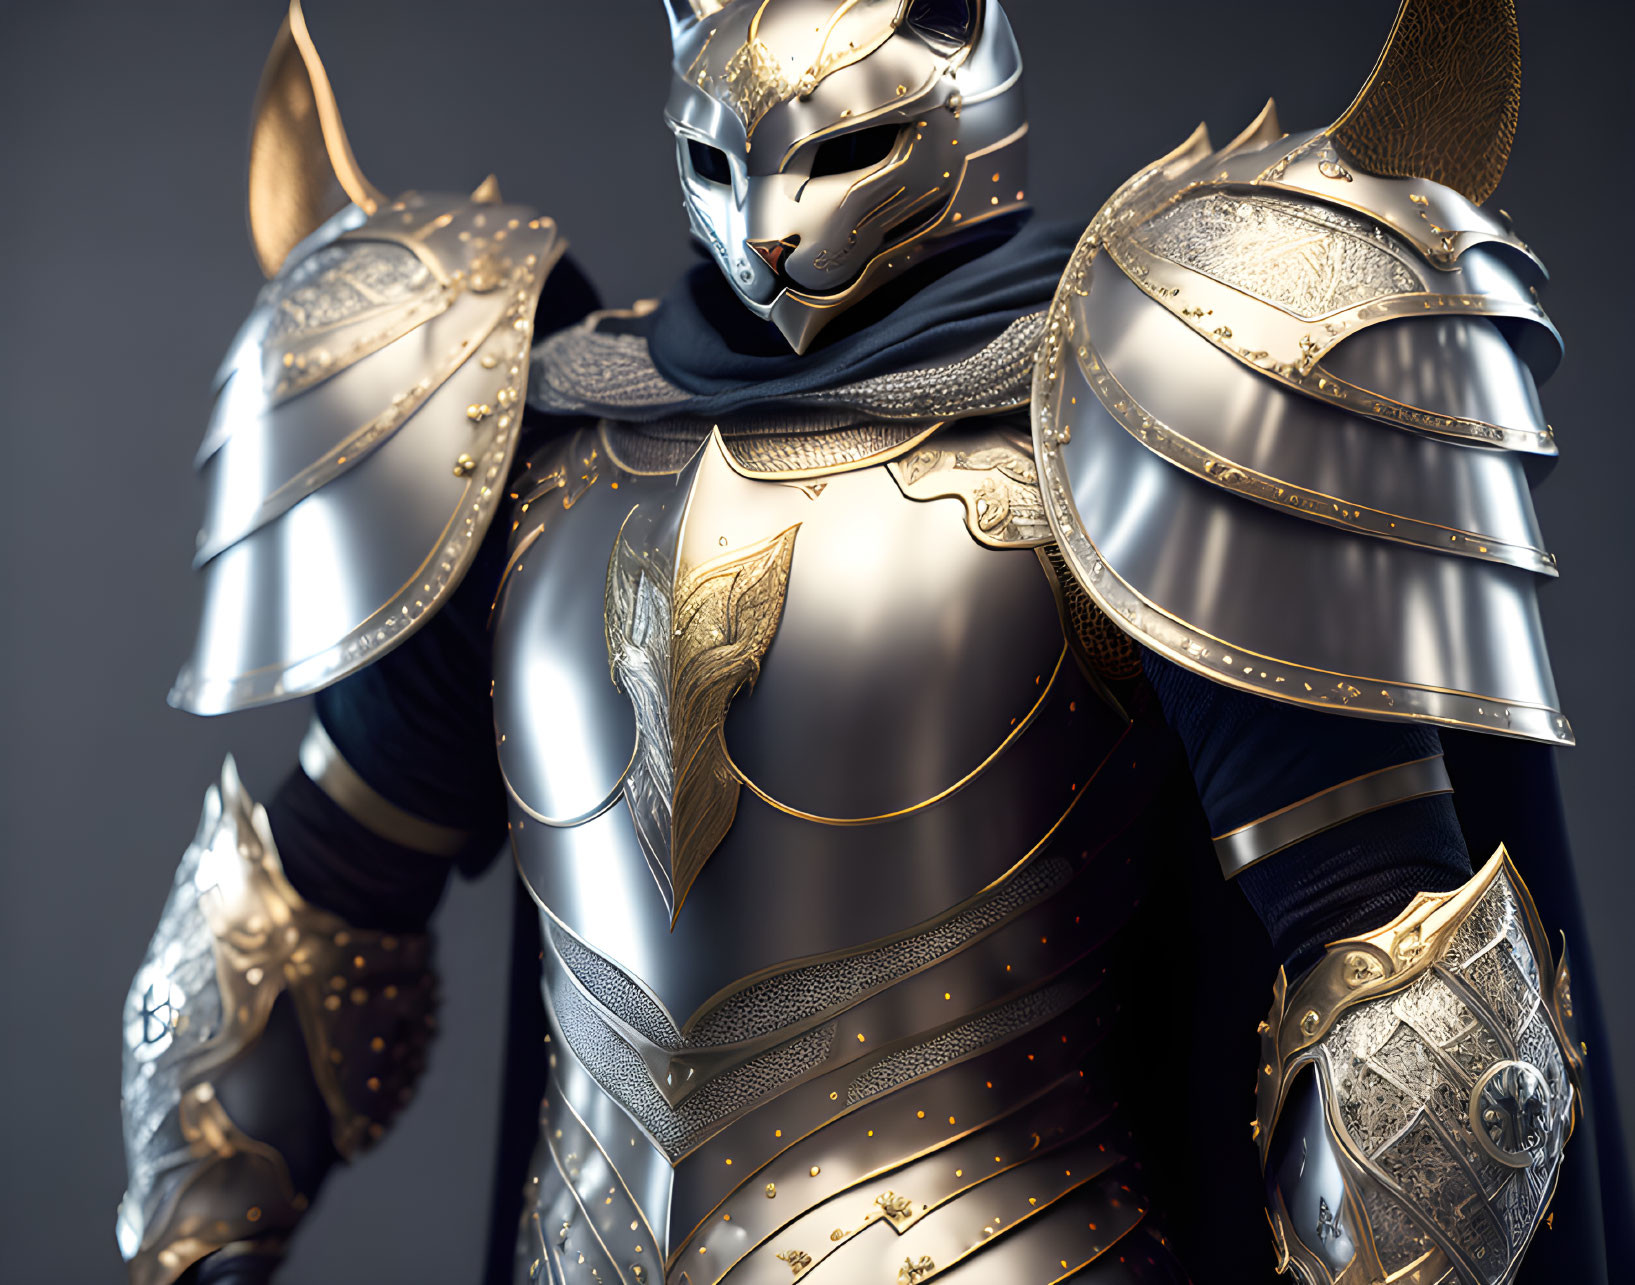 Elaborate fantasy armor with feline motif and gold accents